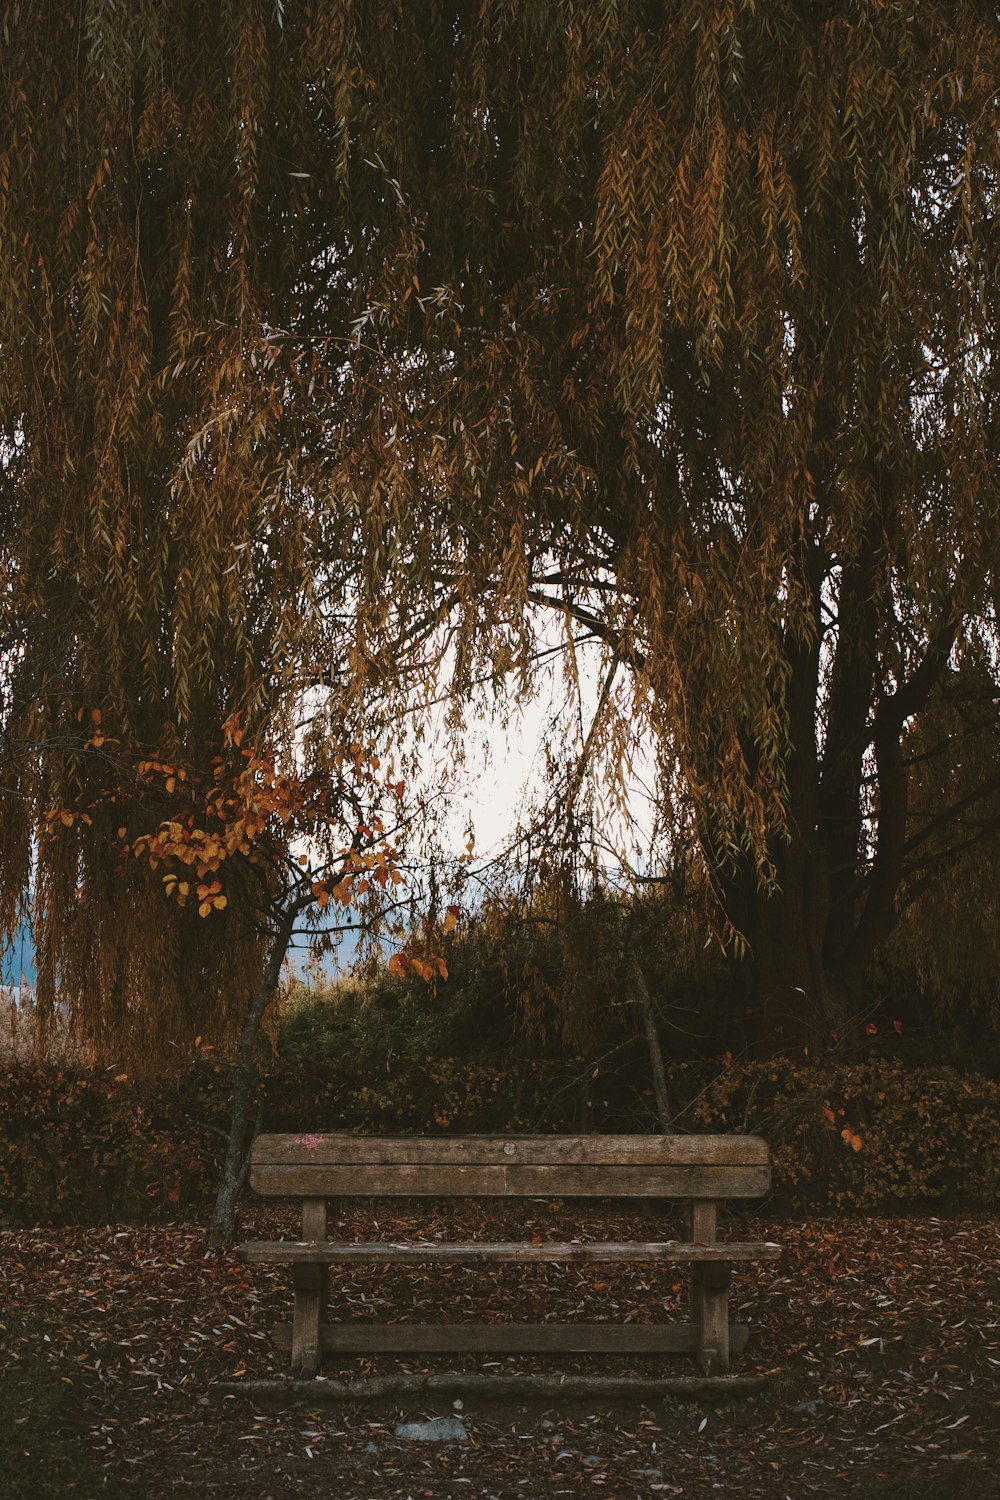 a wooden bench sitting under a large tree